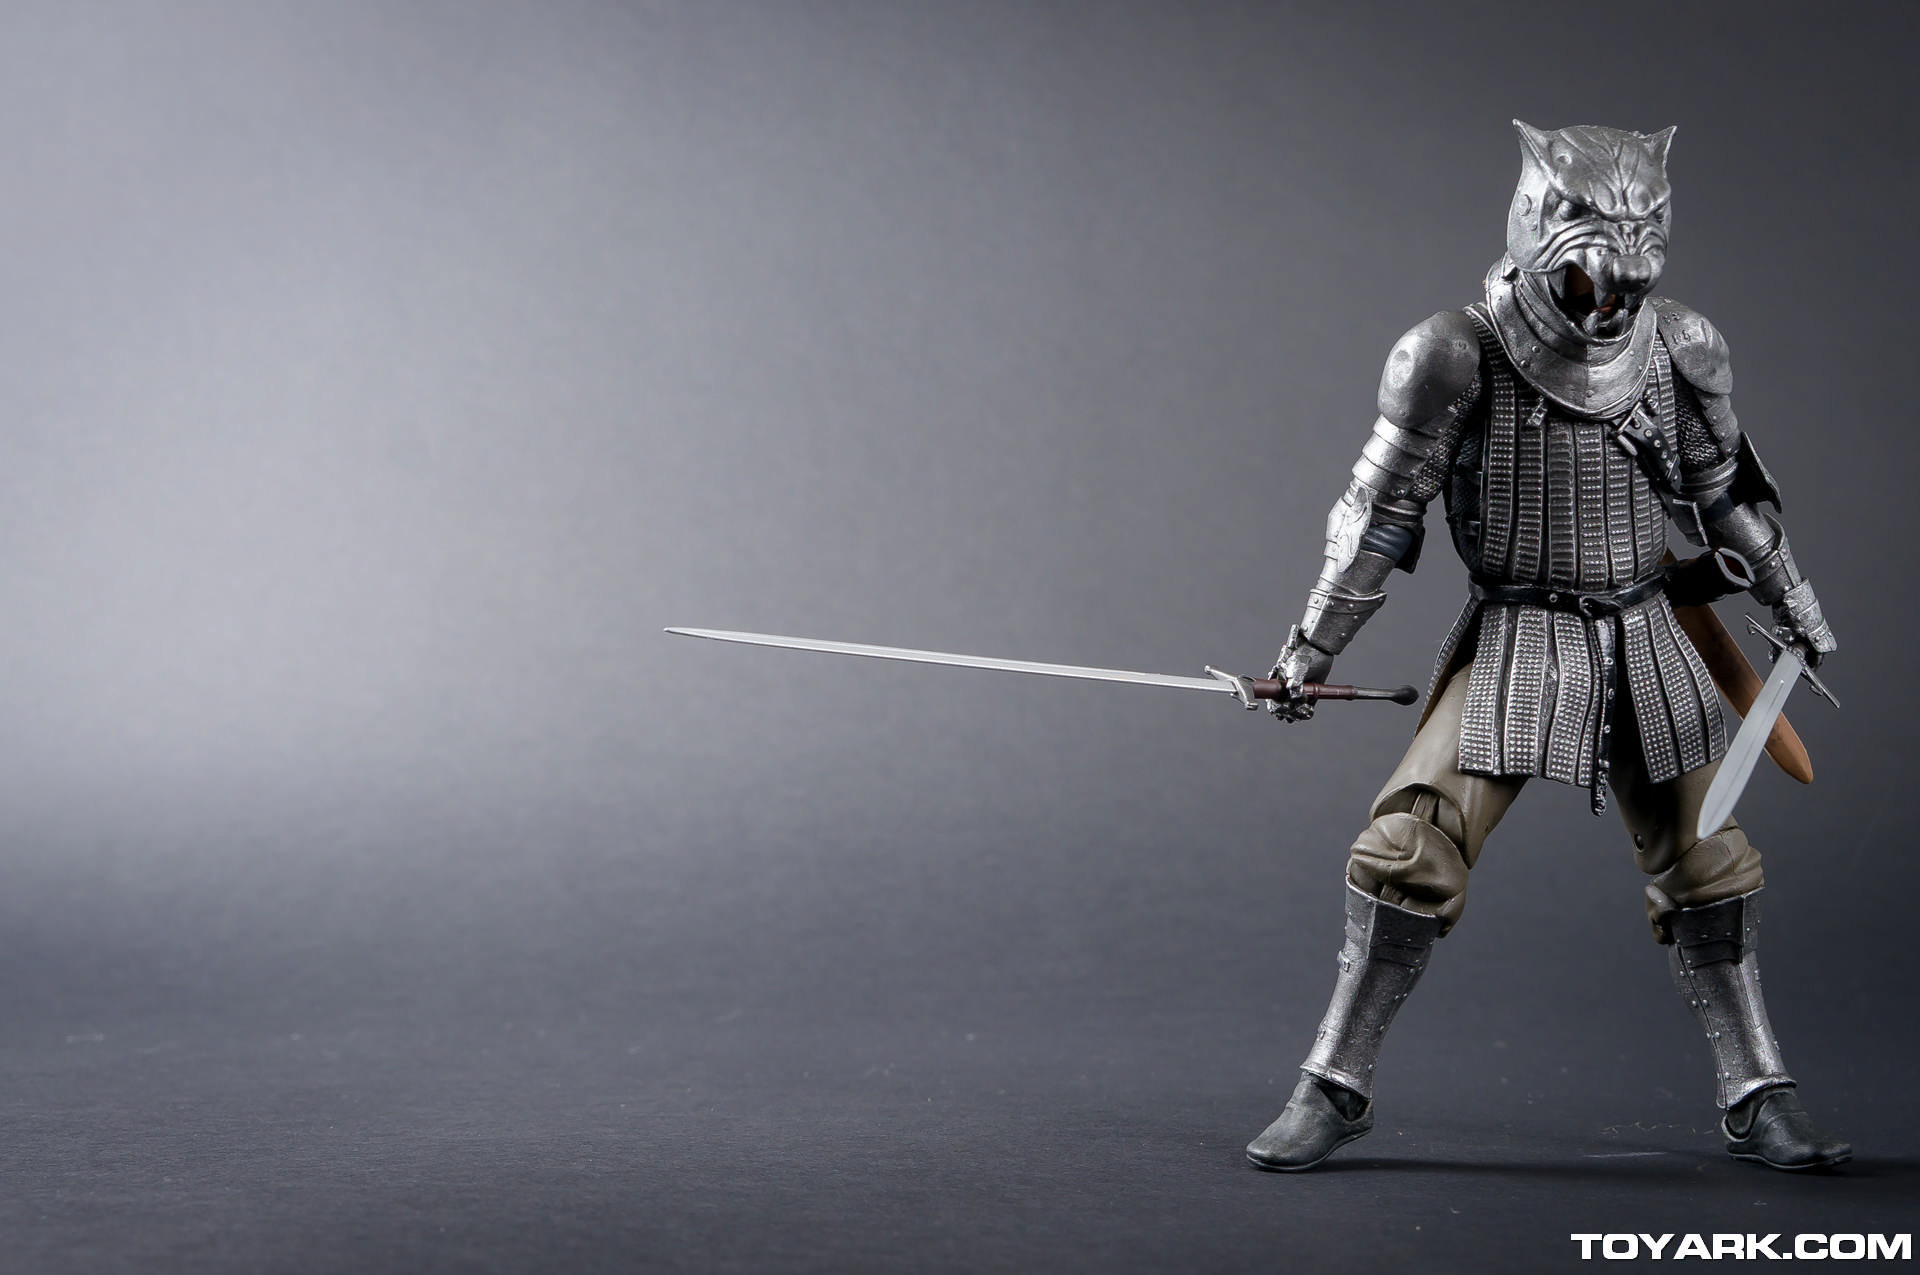 game of thrones the hound action figure